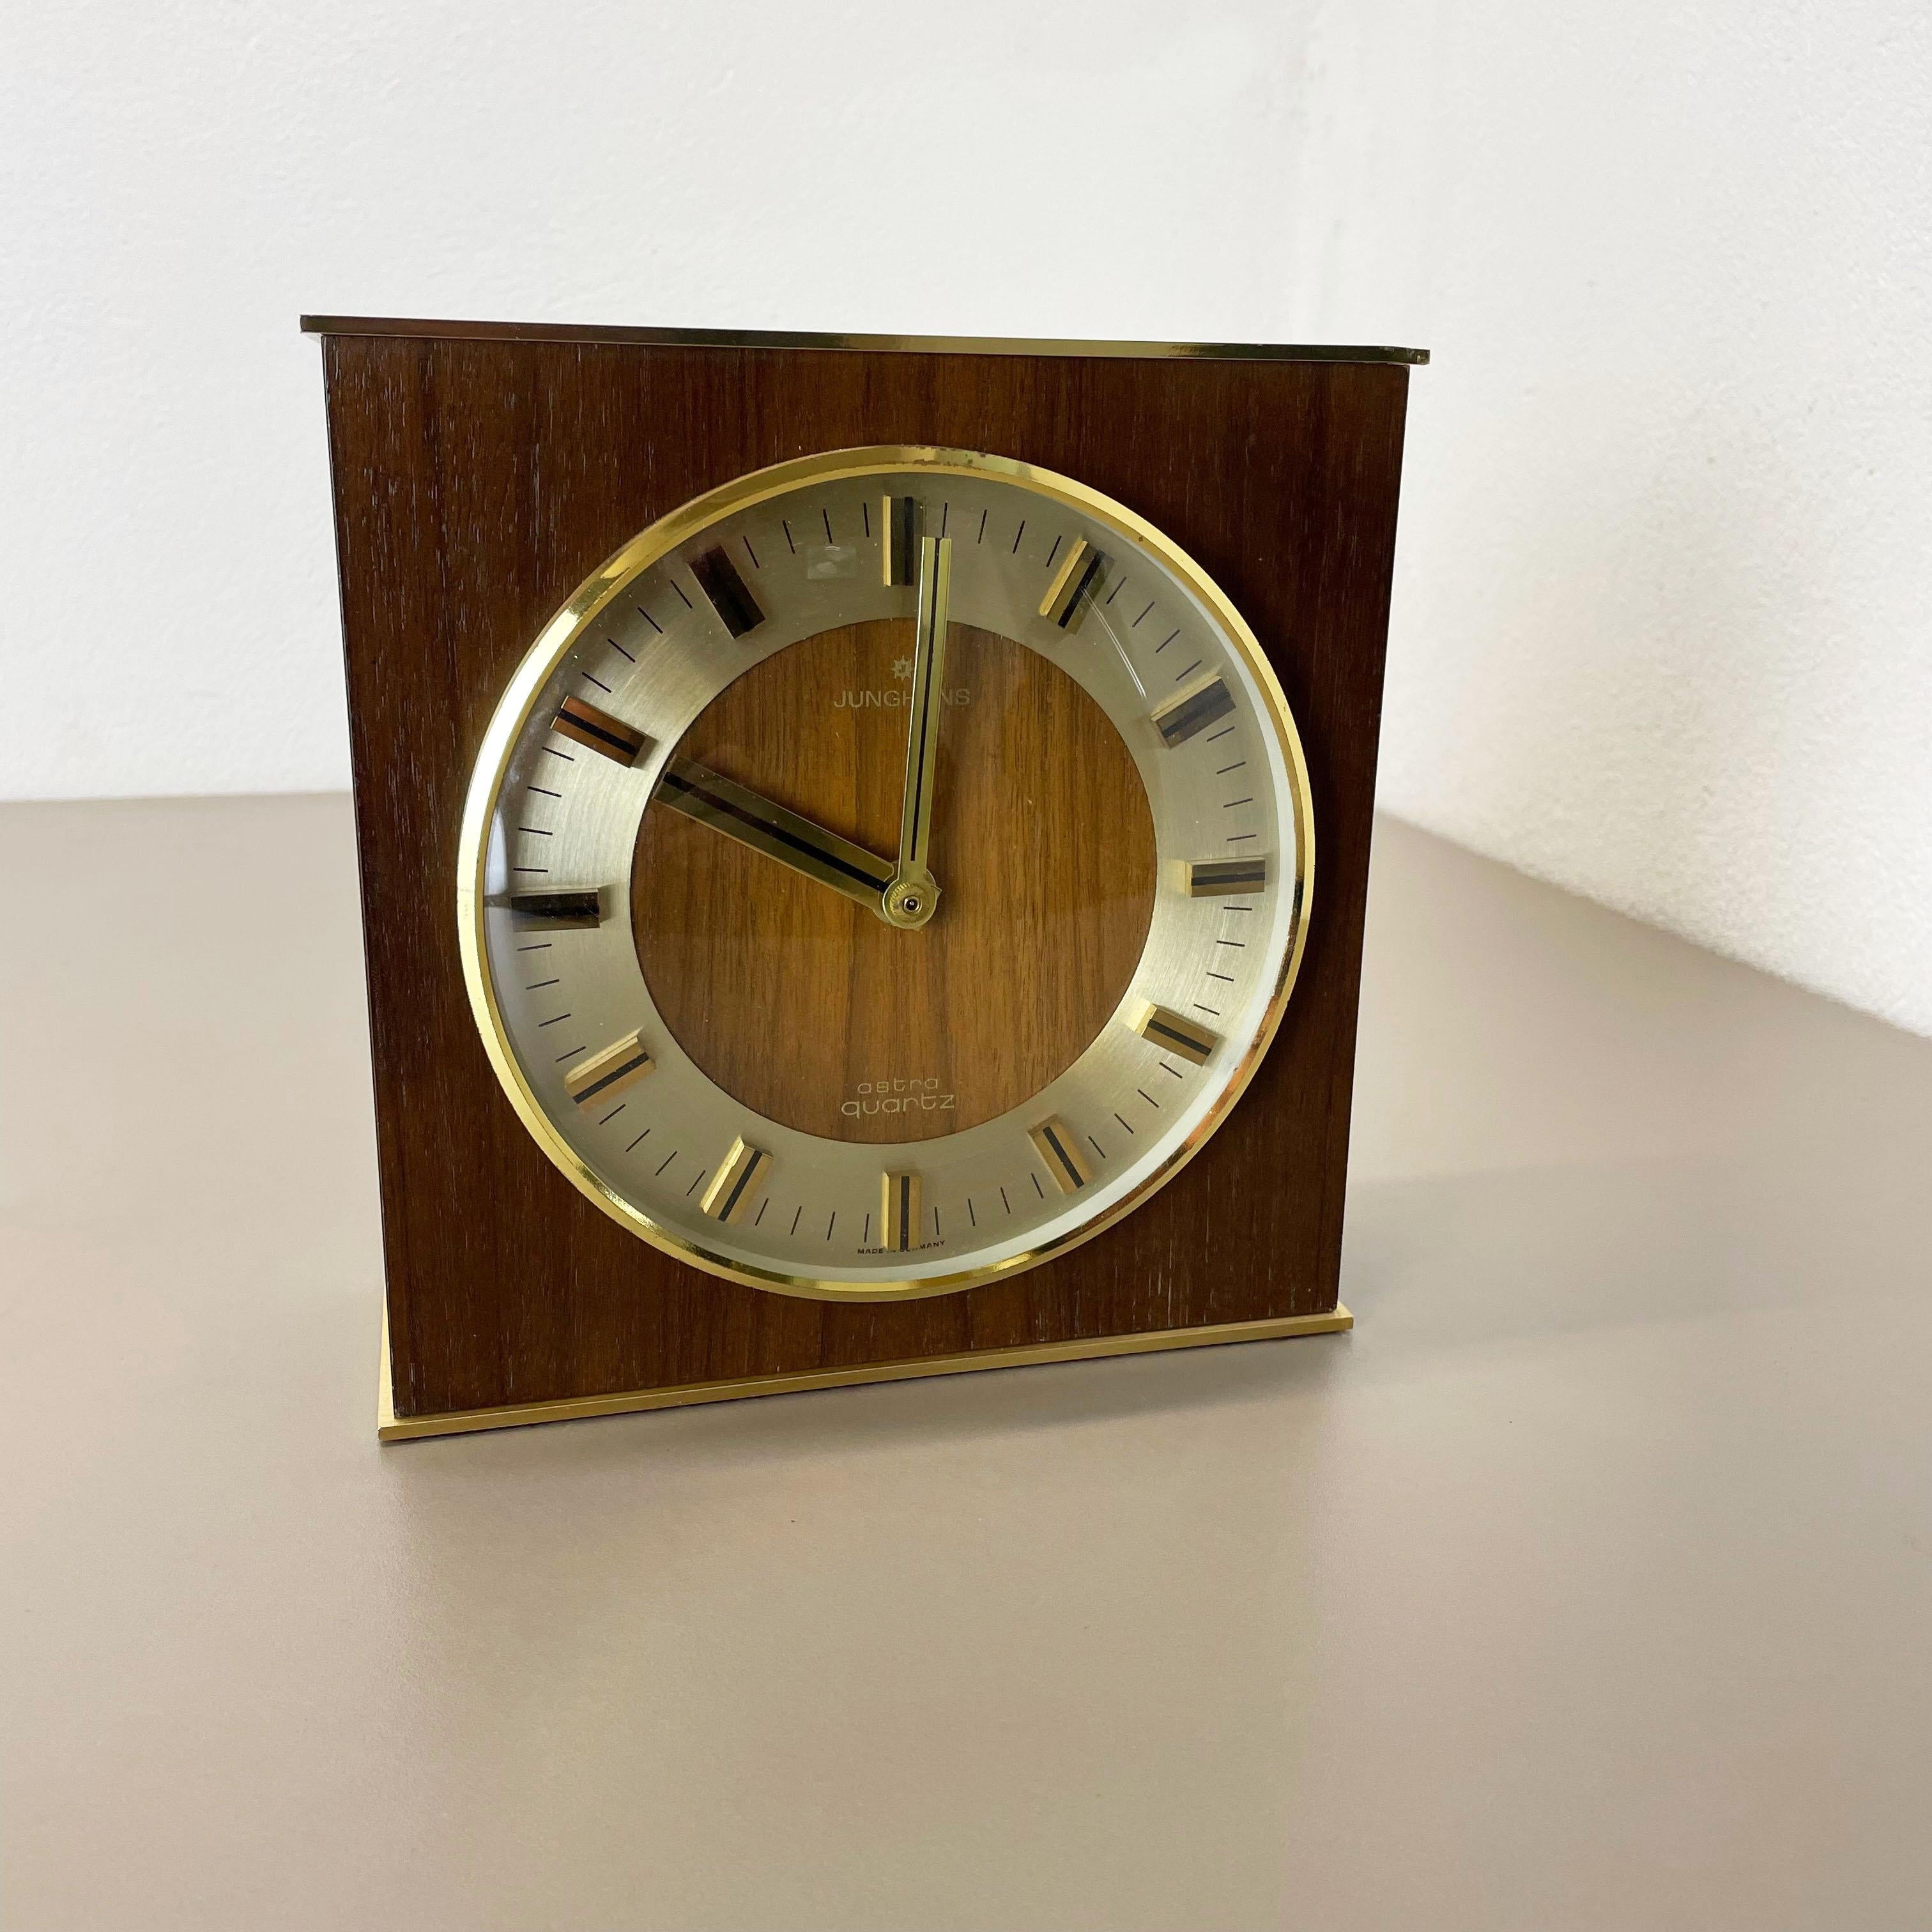 Article:

Table clock



Origin:

Germany


Producer:

Junghans Electronic, Germany


Age:

1970s



Description:

This original vintage table clock was produced in the 1960s by the premium clock producer Junghans in Germany.